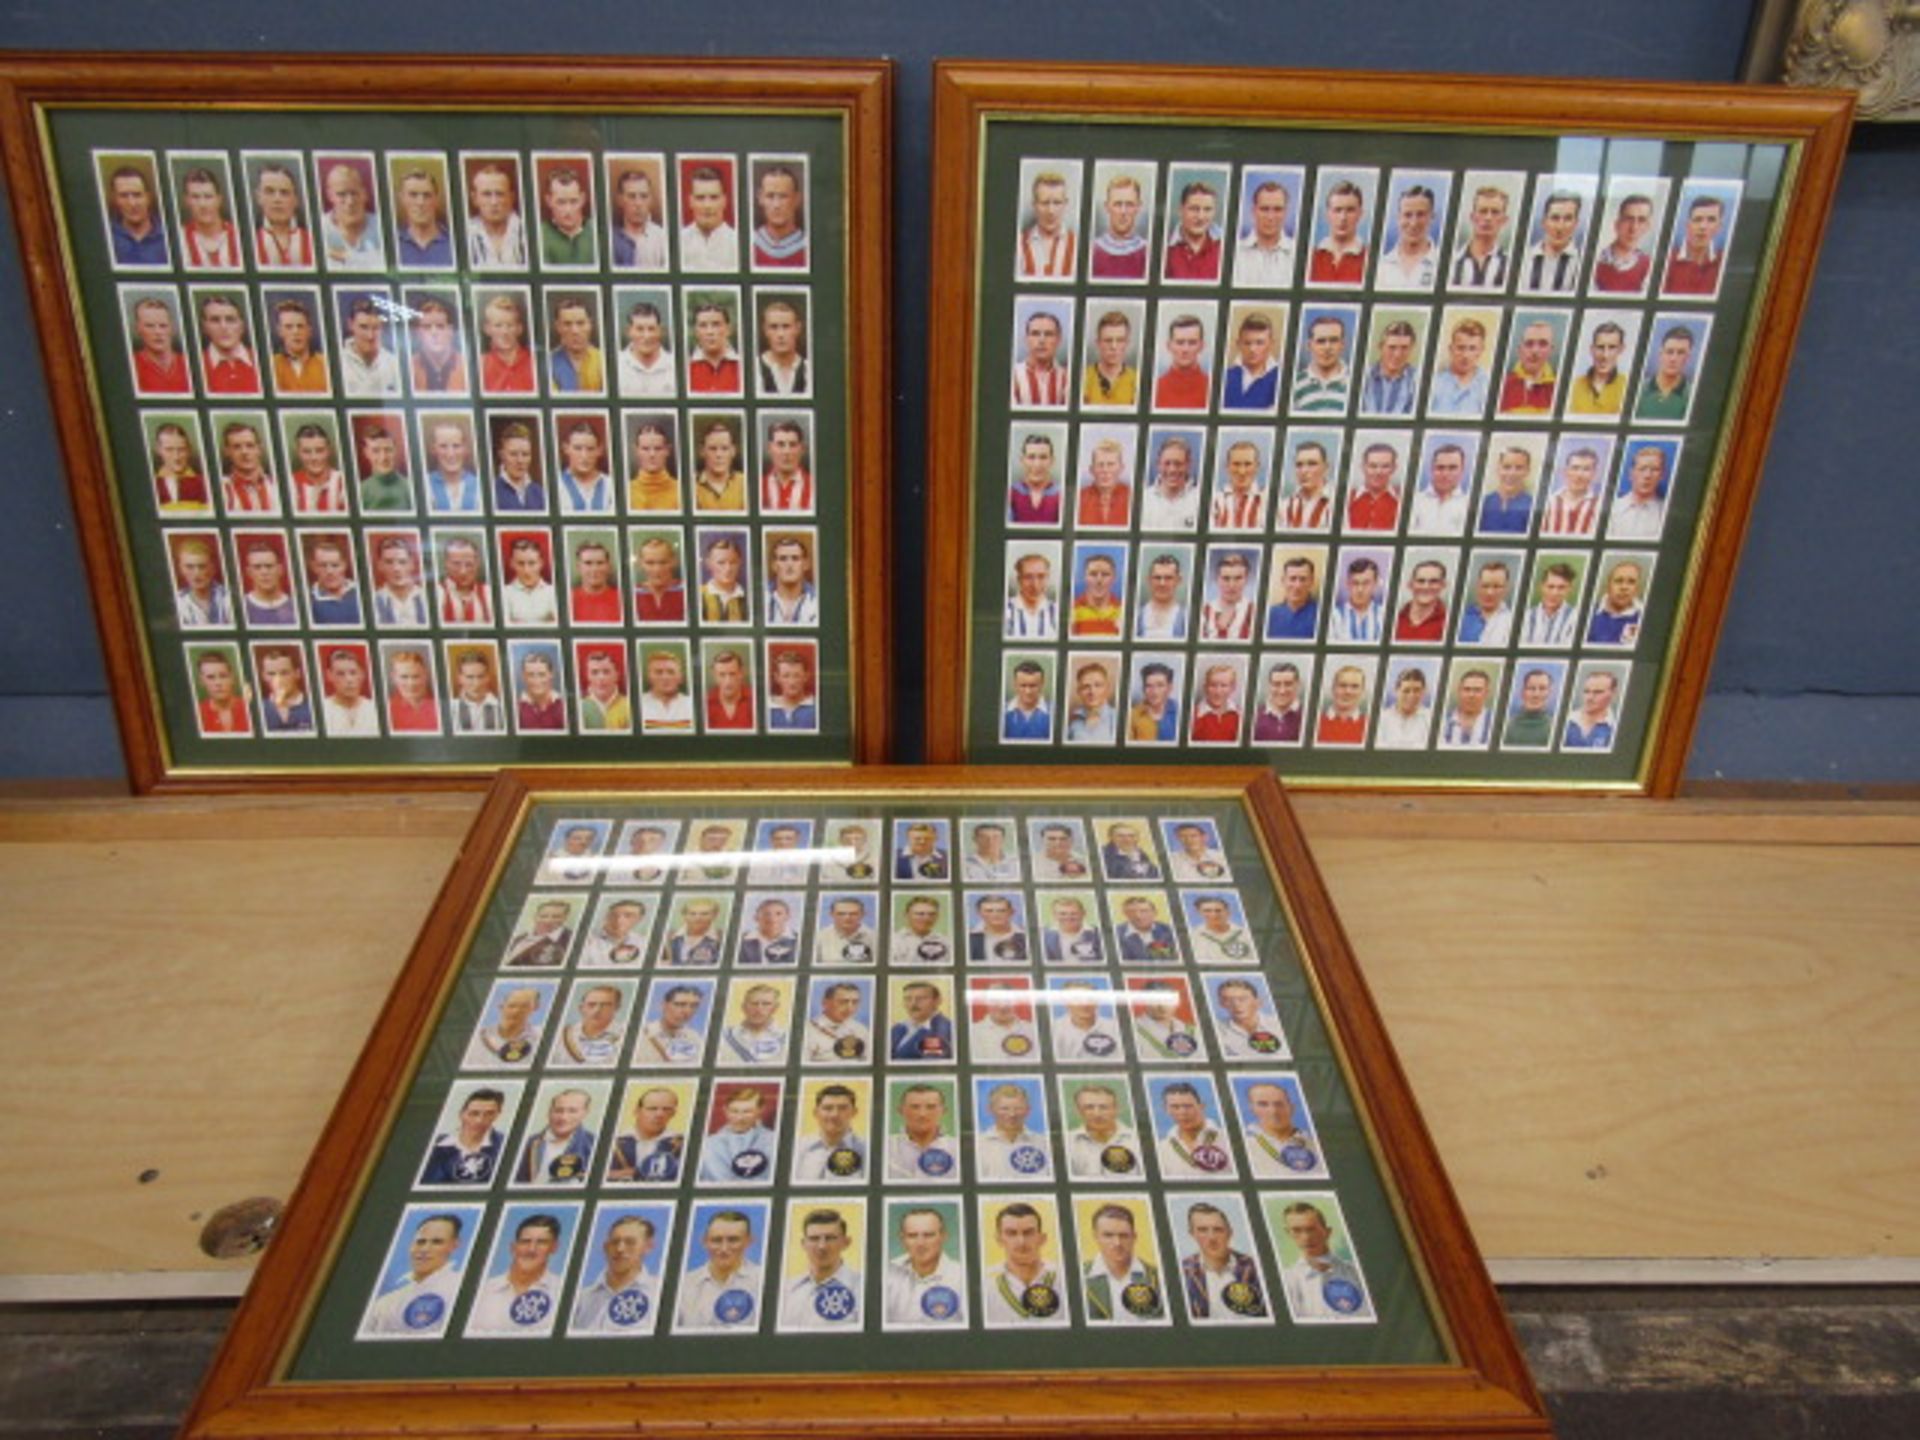 Wills framed F.A cigarette cards and John Players cricketers